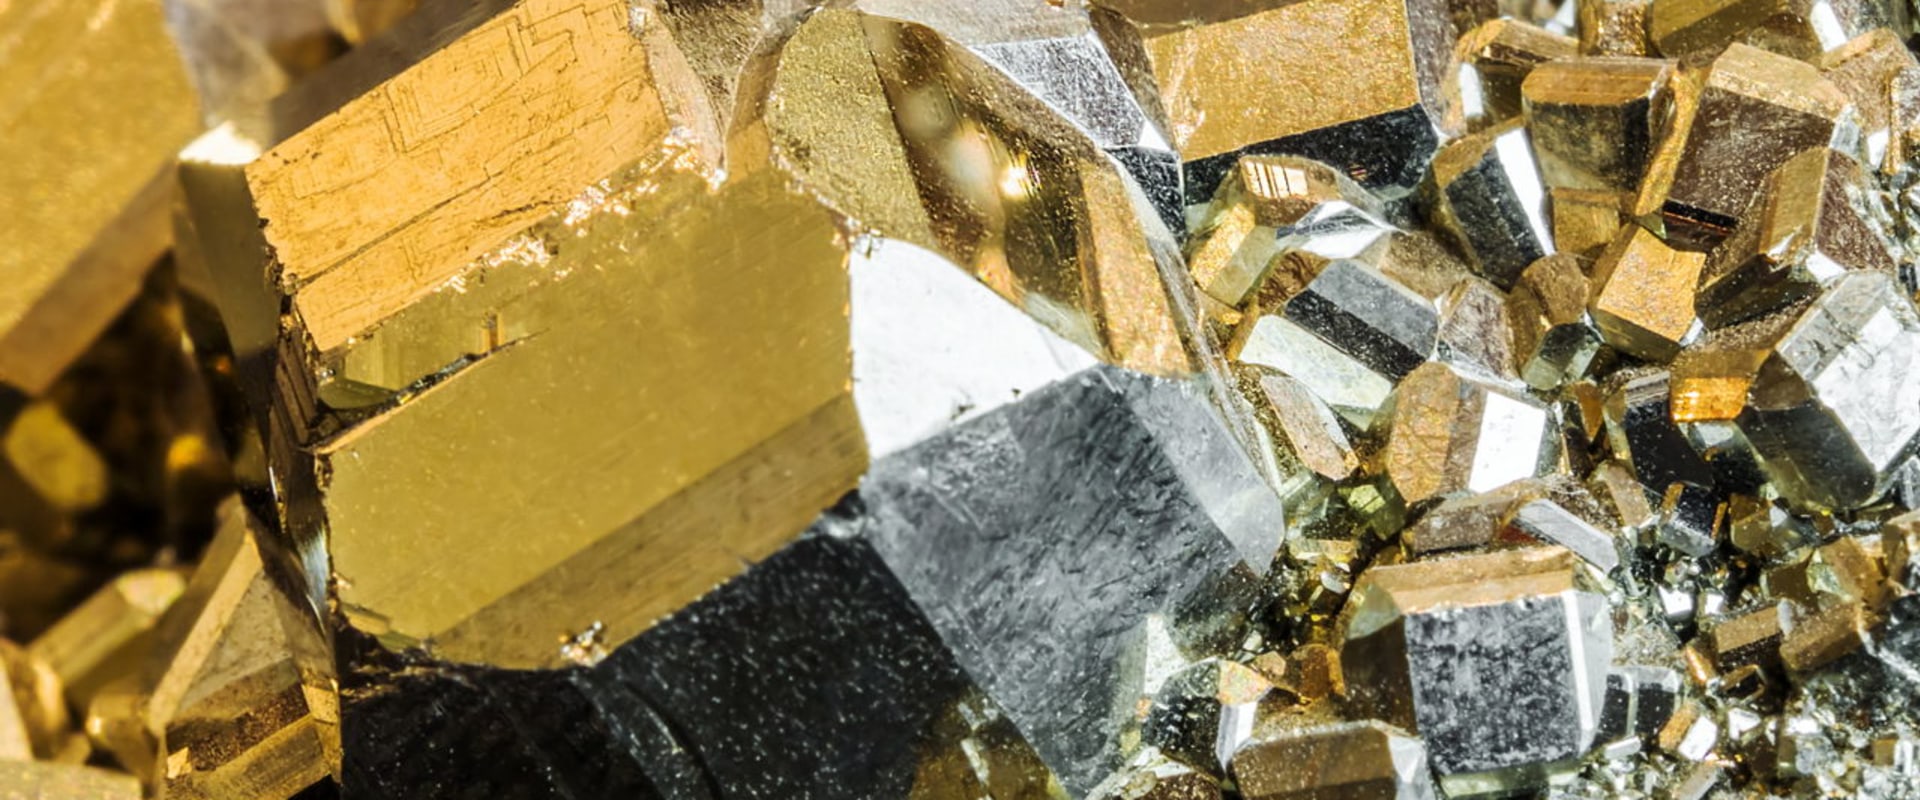 What is considered a precious metal?